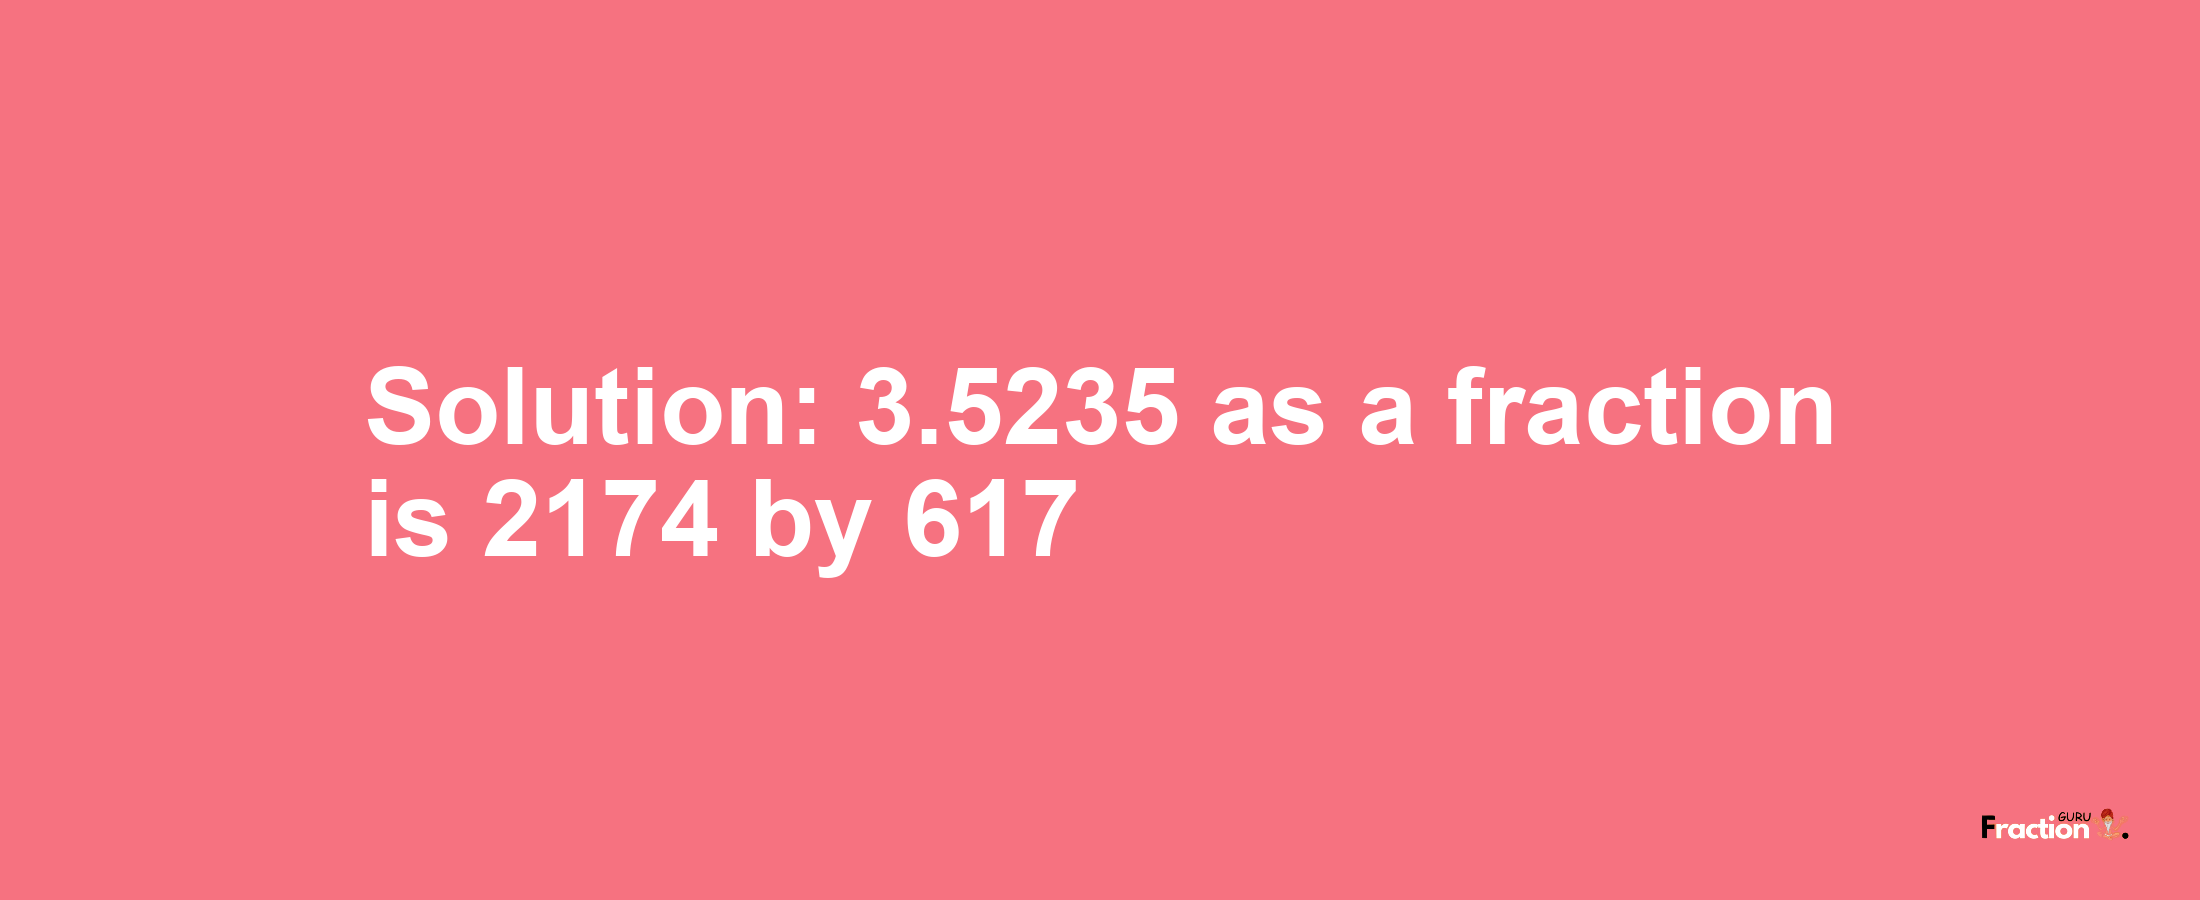 Solution:3.5235 as a fraction is 2174/617